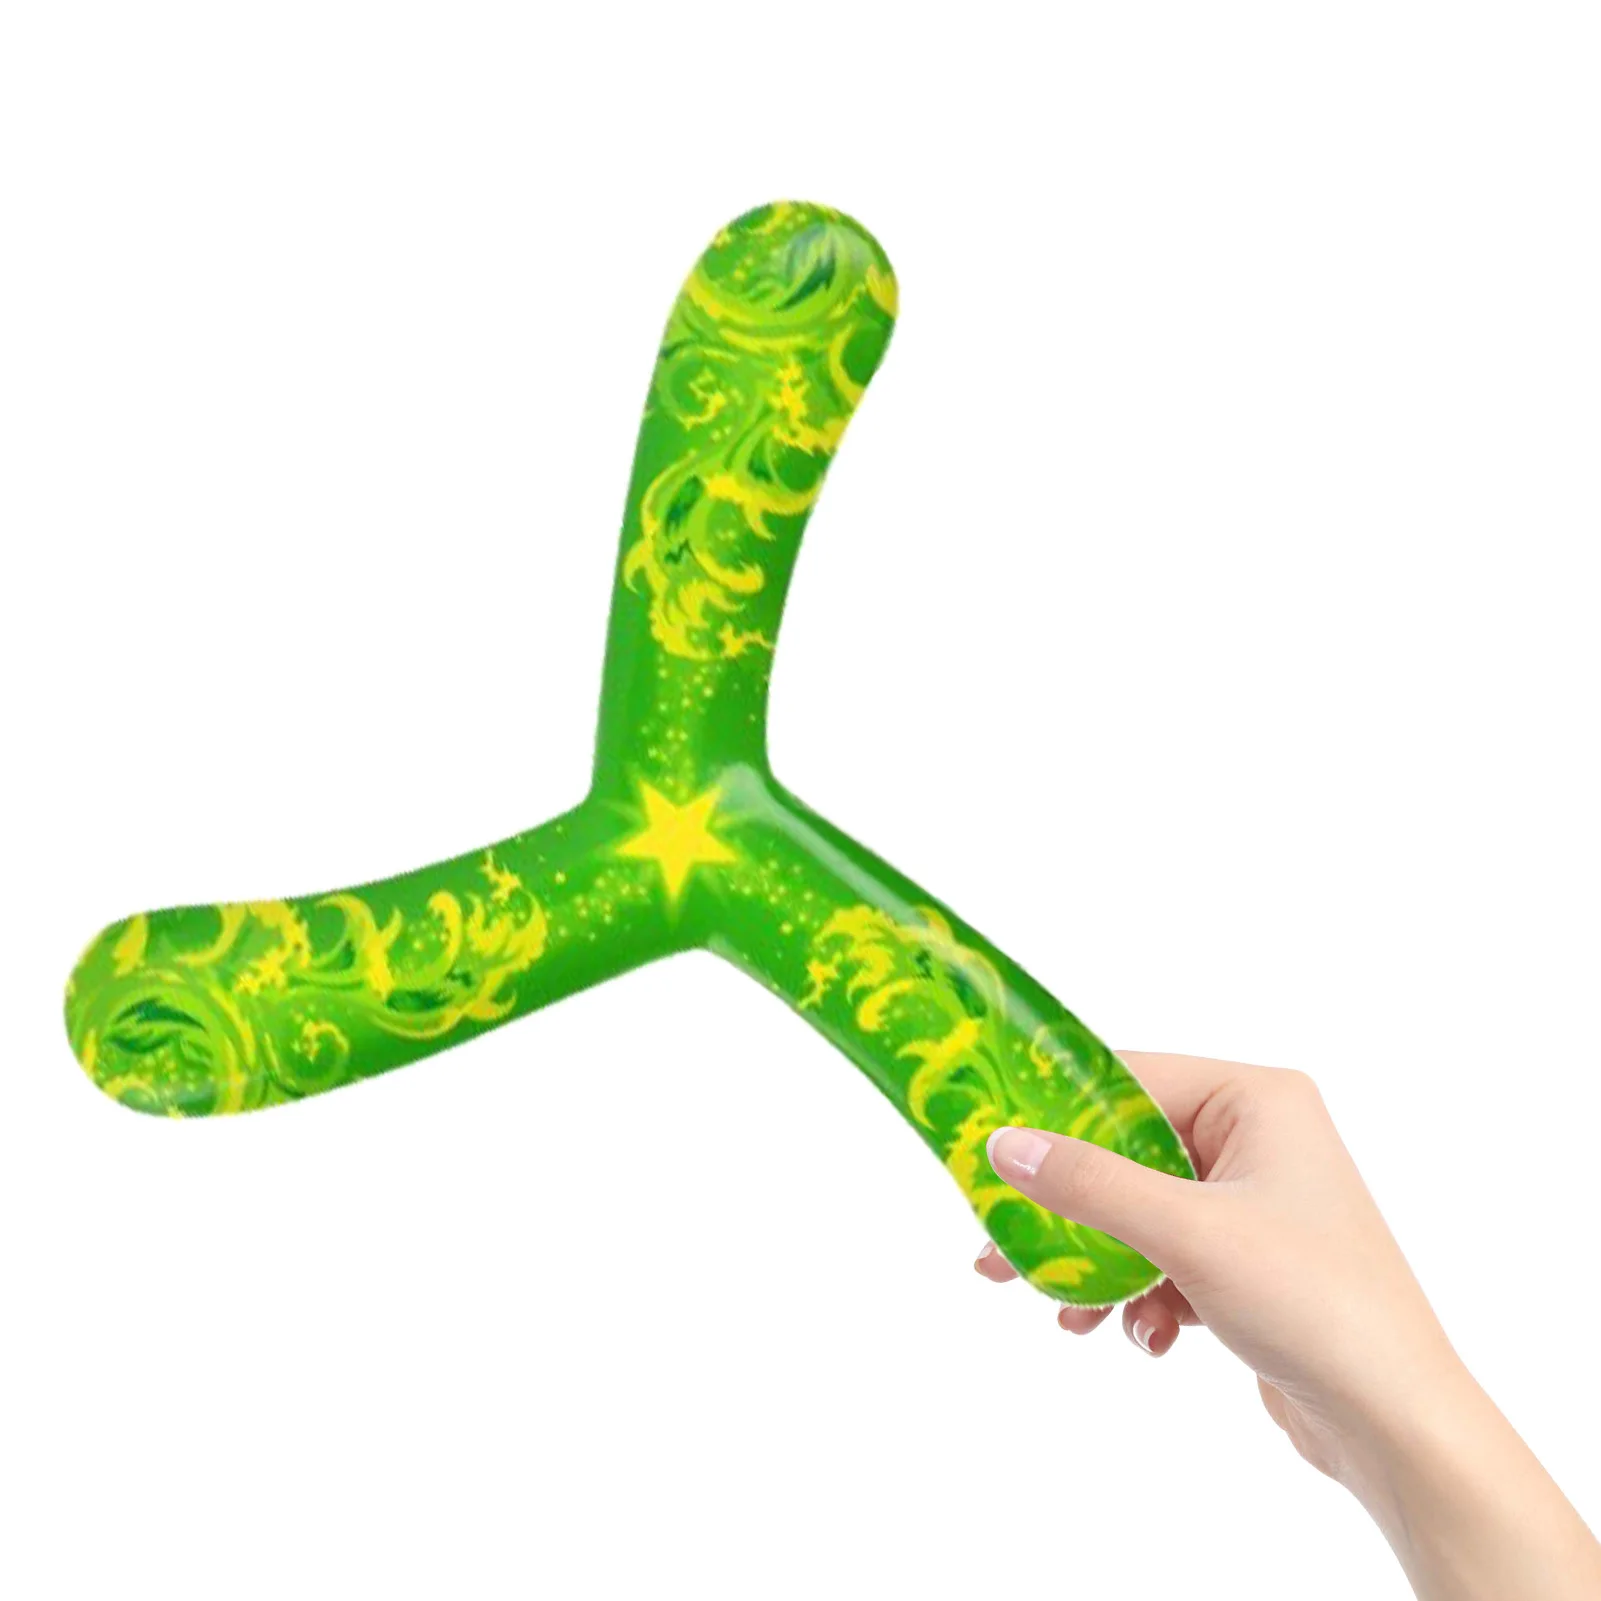 Kids Boomerangs Safe Boomerangs For Kids 3 Blade Design Easy To Throw Soft Boomerangs For Athletes For Sports Game Toy To